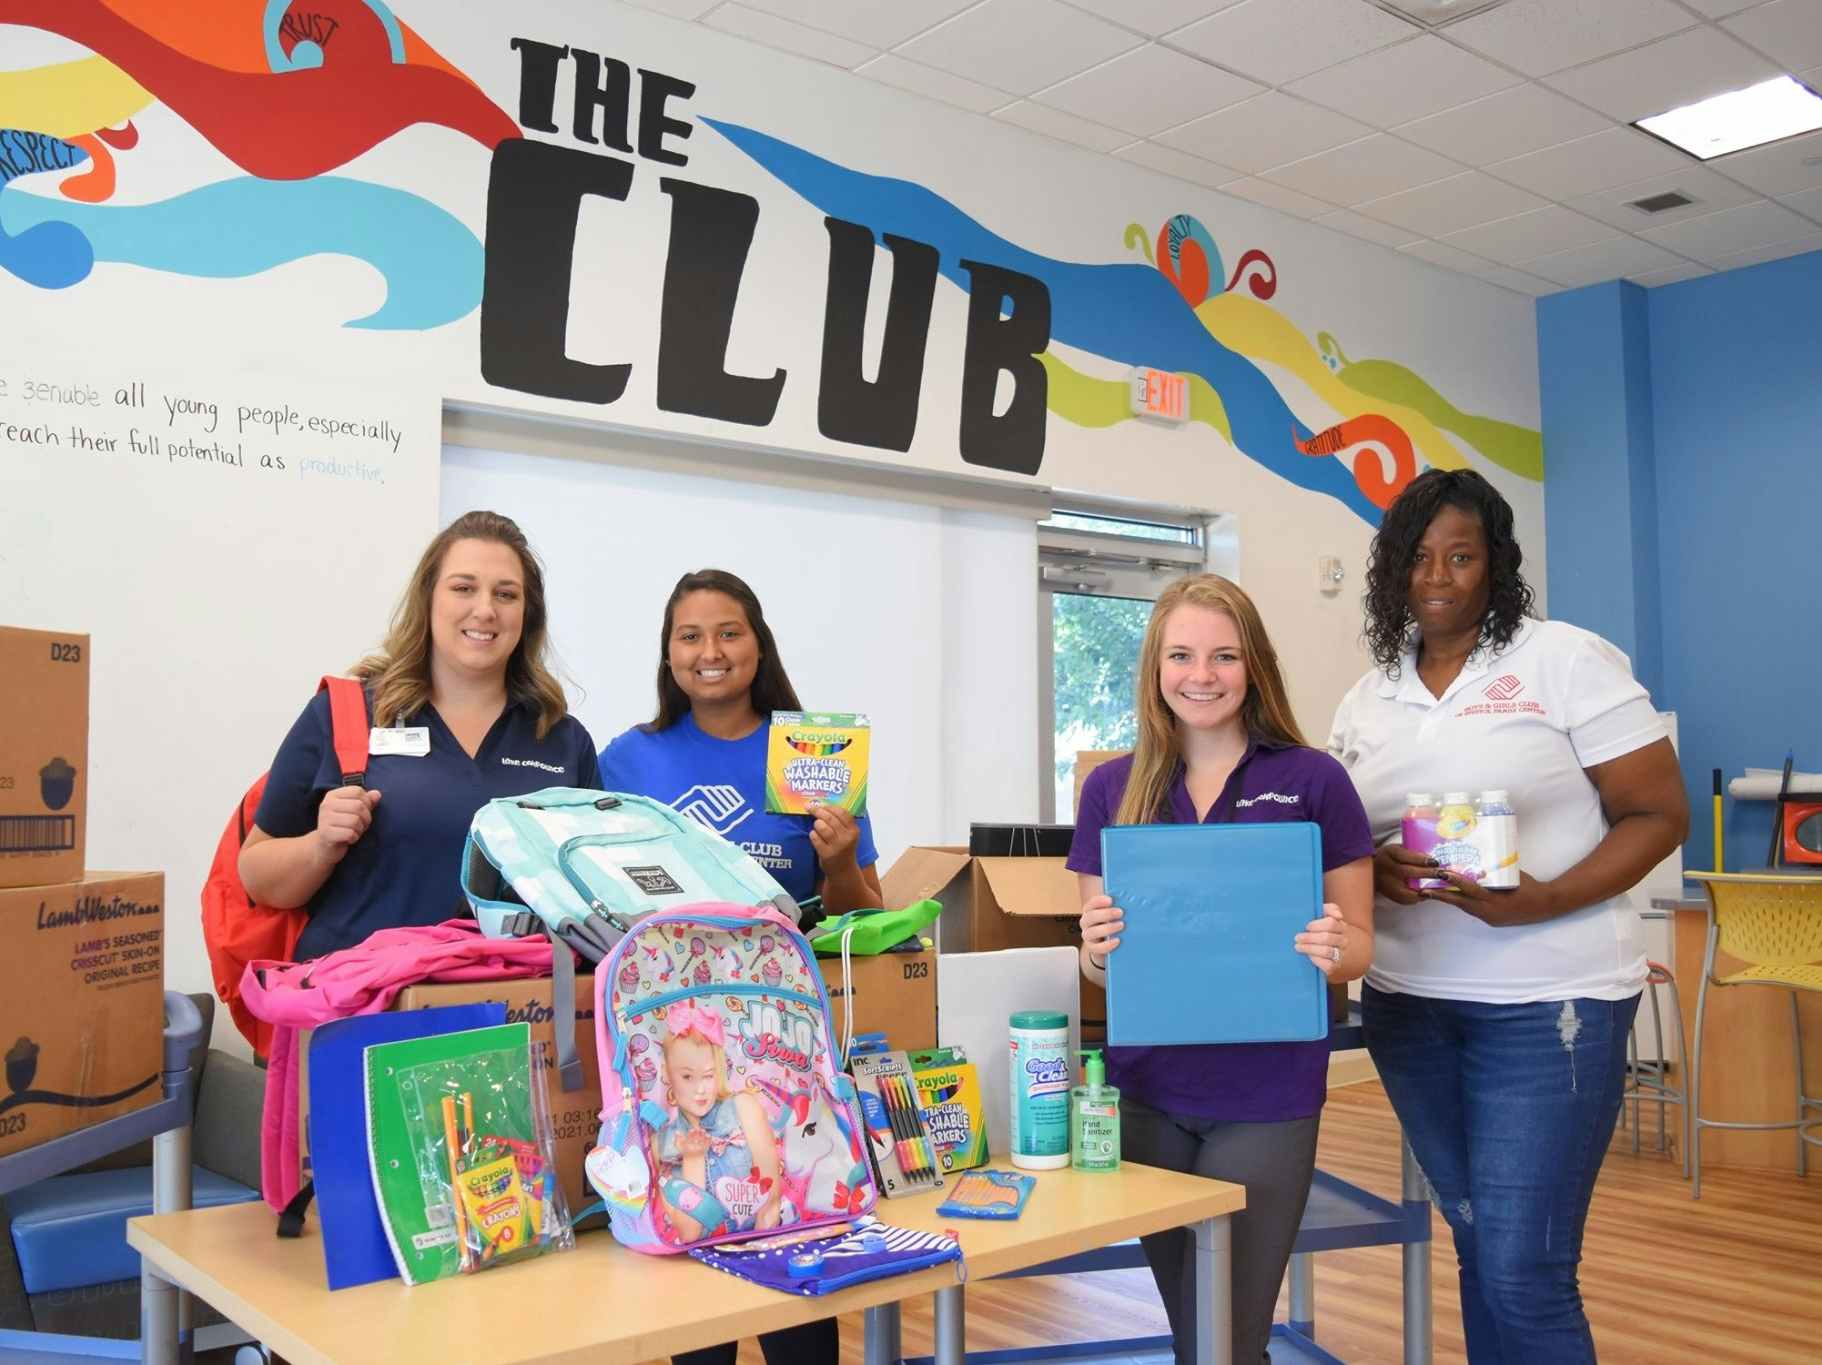 Three women posing for a photo with school supplies on a table in front of them.